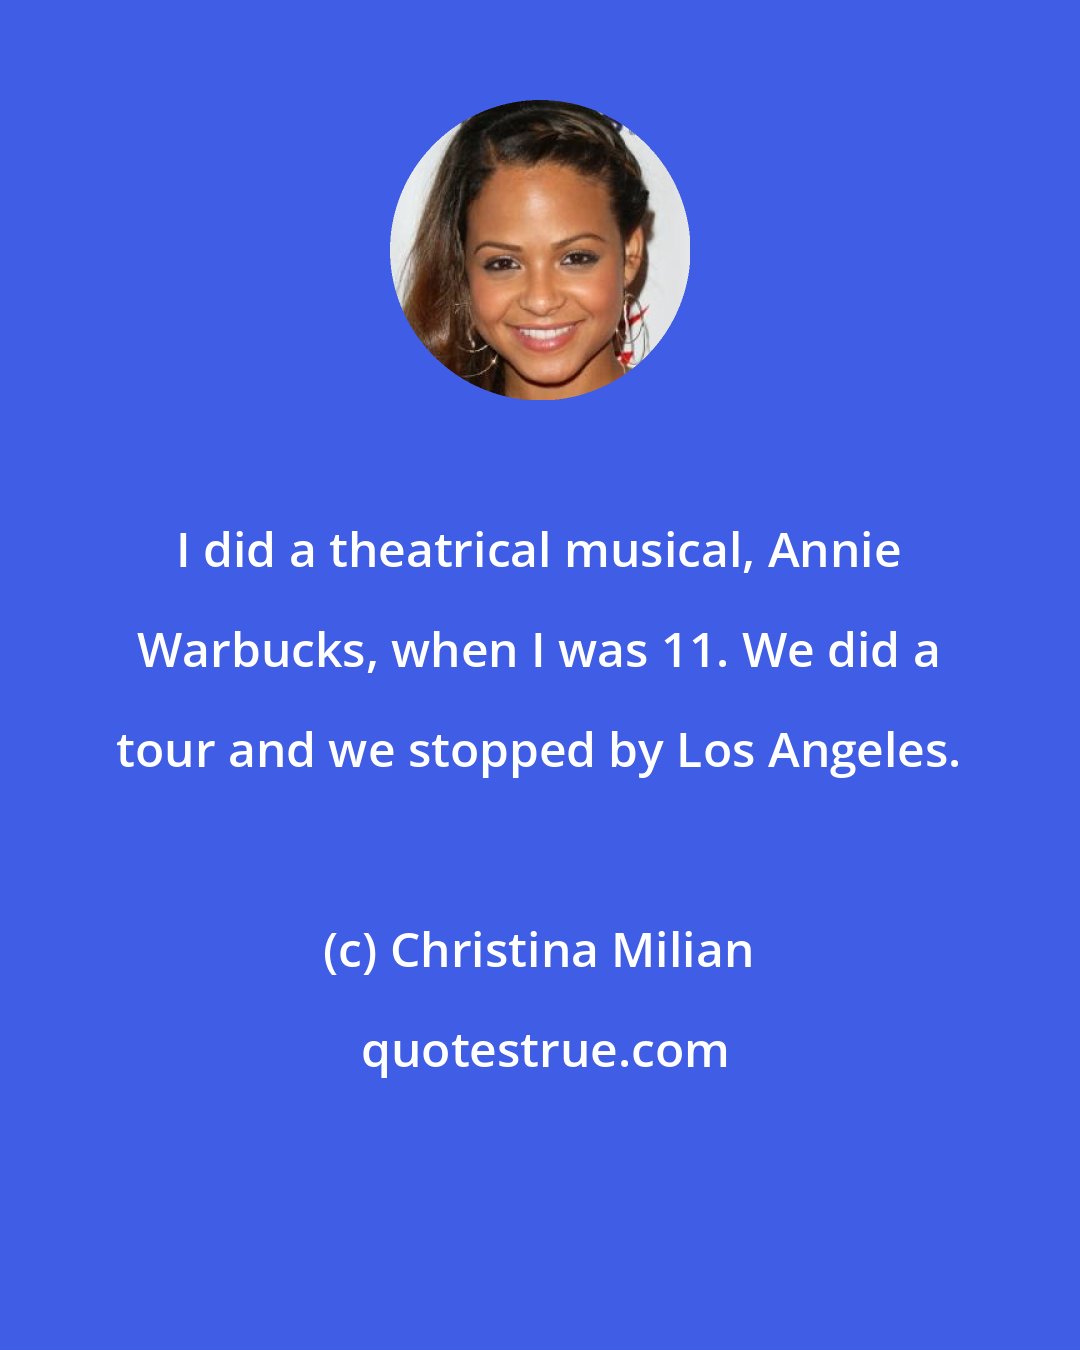 Christina Milian: I did a theatrical musical, Annie Warbucks, when I was 11. We did a tour and we stopped by Los Angeles.